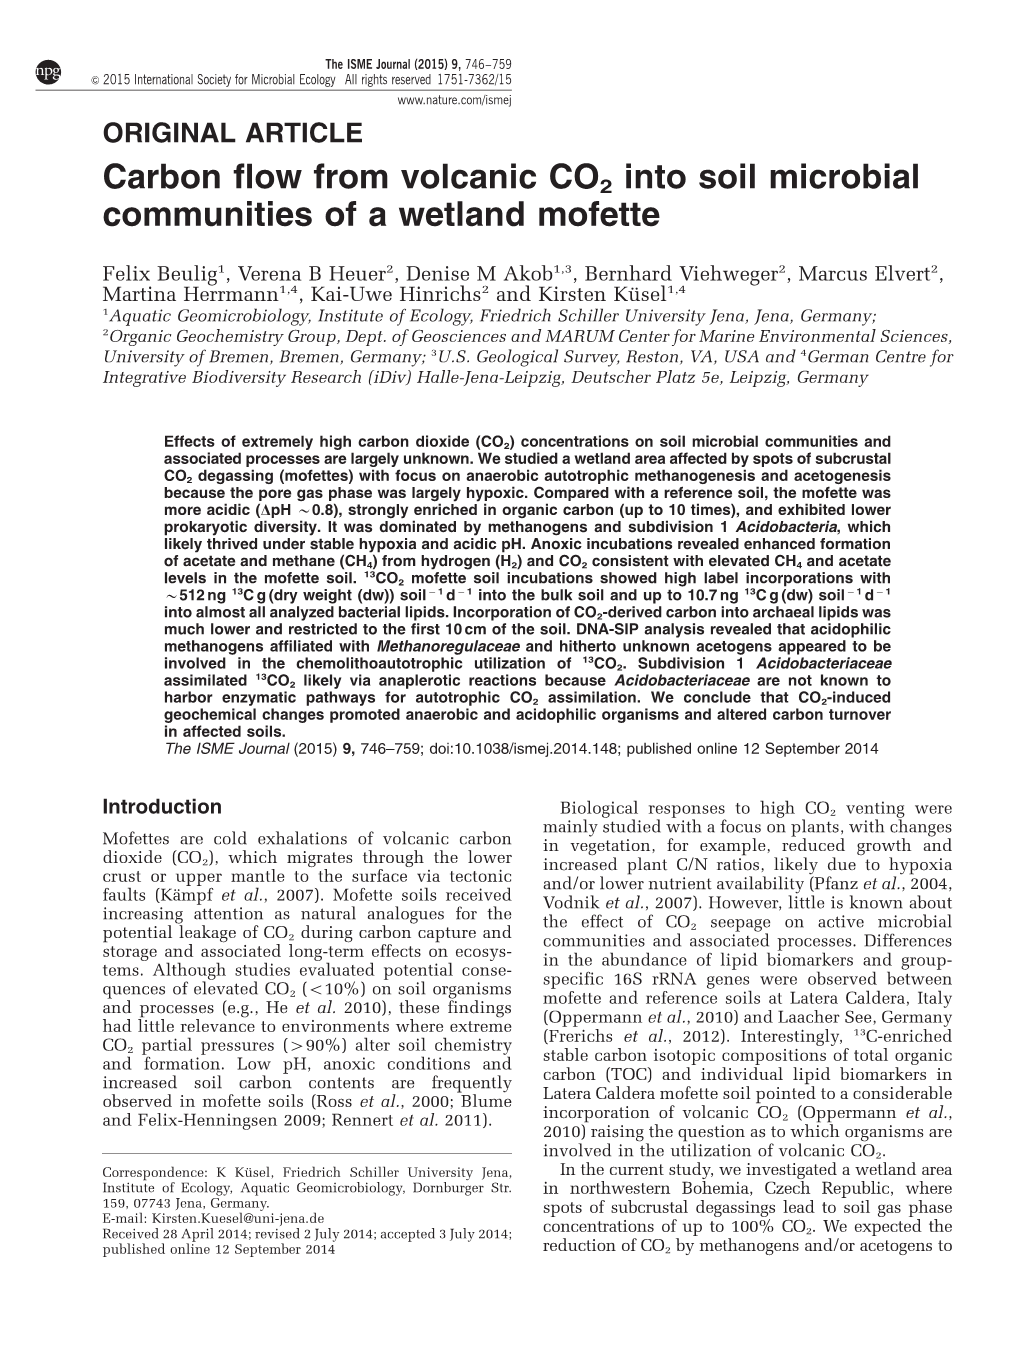 Carbon Flow from Volcanic CO2 Into Soil Microbial Communities of a Wetland Mofette